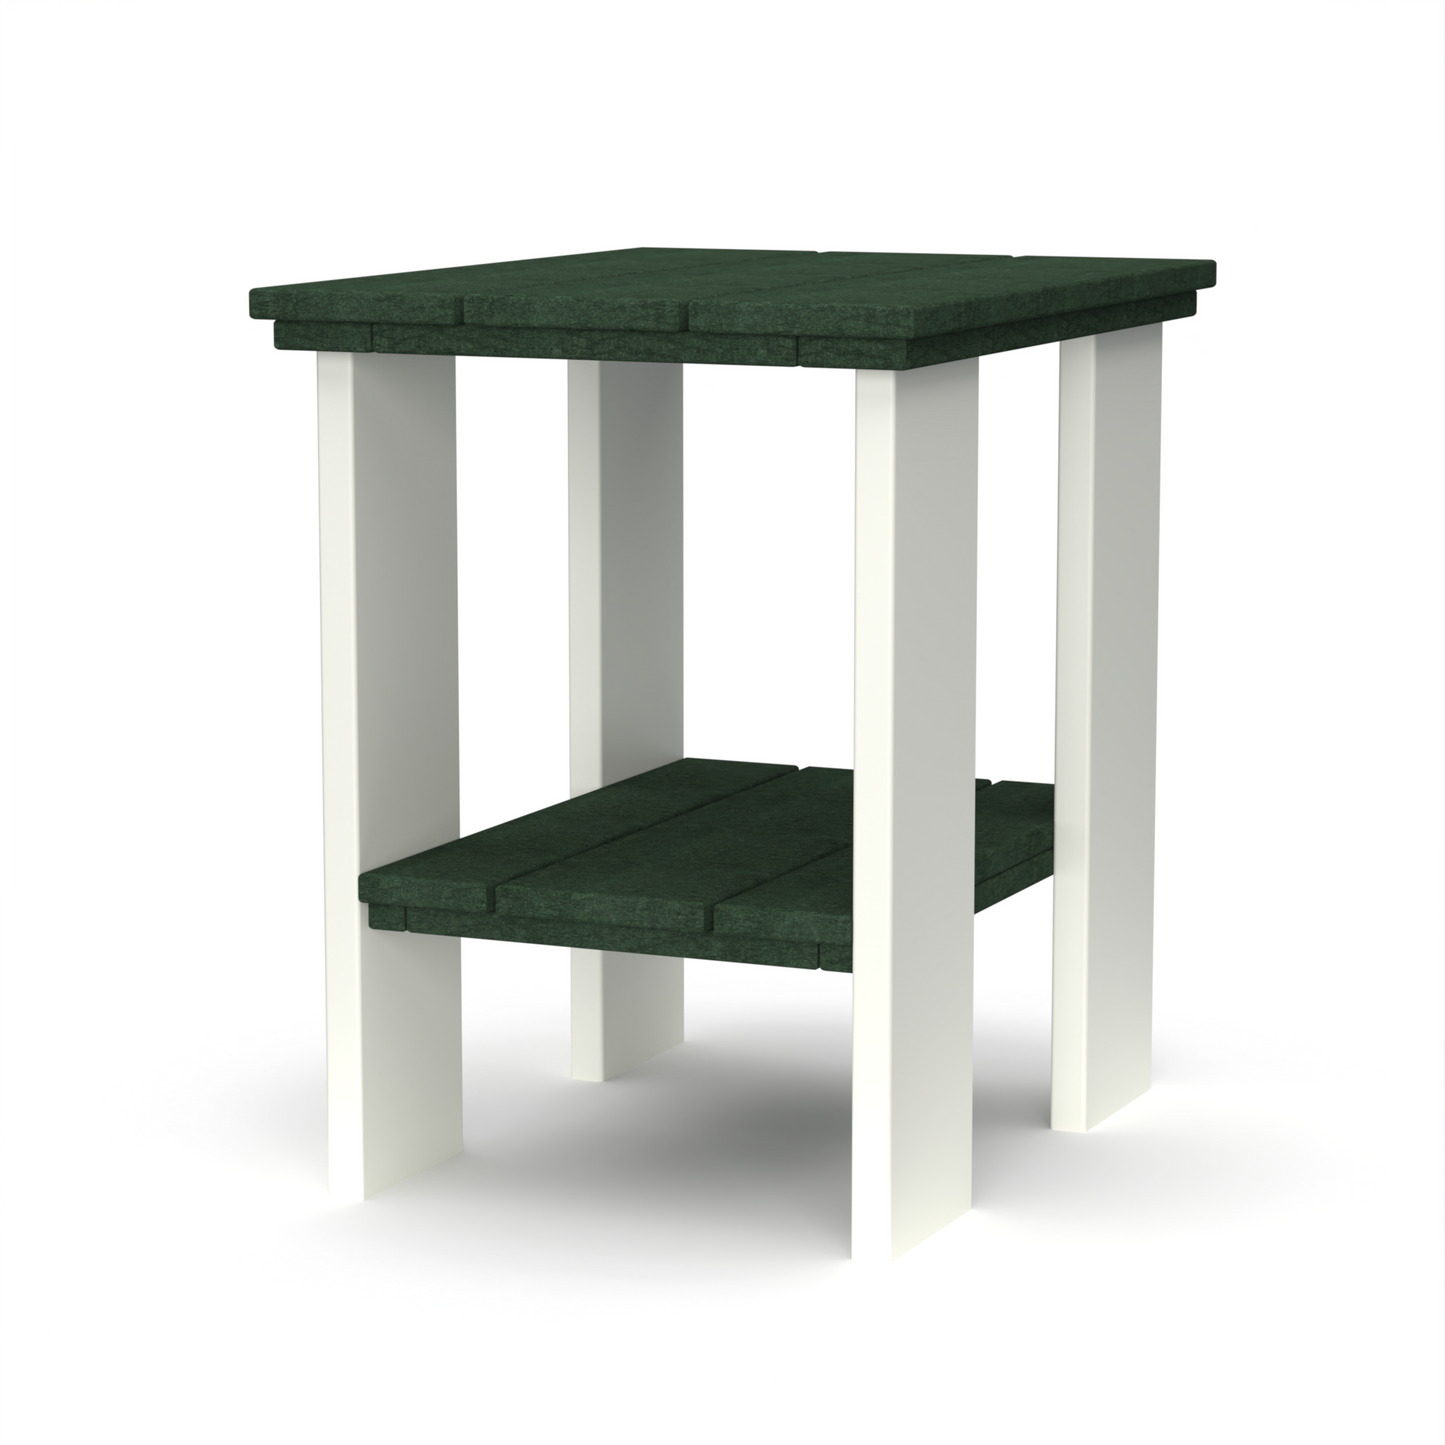 Wildridge Recycled Plastic Outdoor Contemporary Side Table  (QUICK SHIP) - LEAD TIME TO SHIP 3 TO 4 BUSINESS DAYS